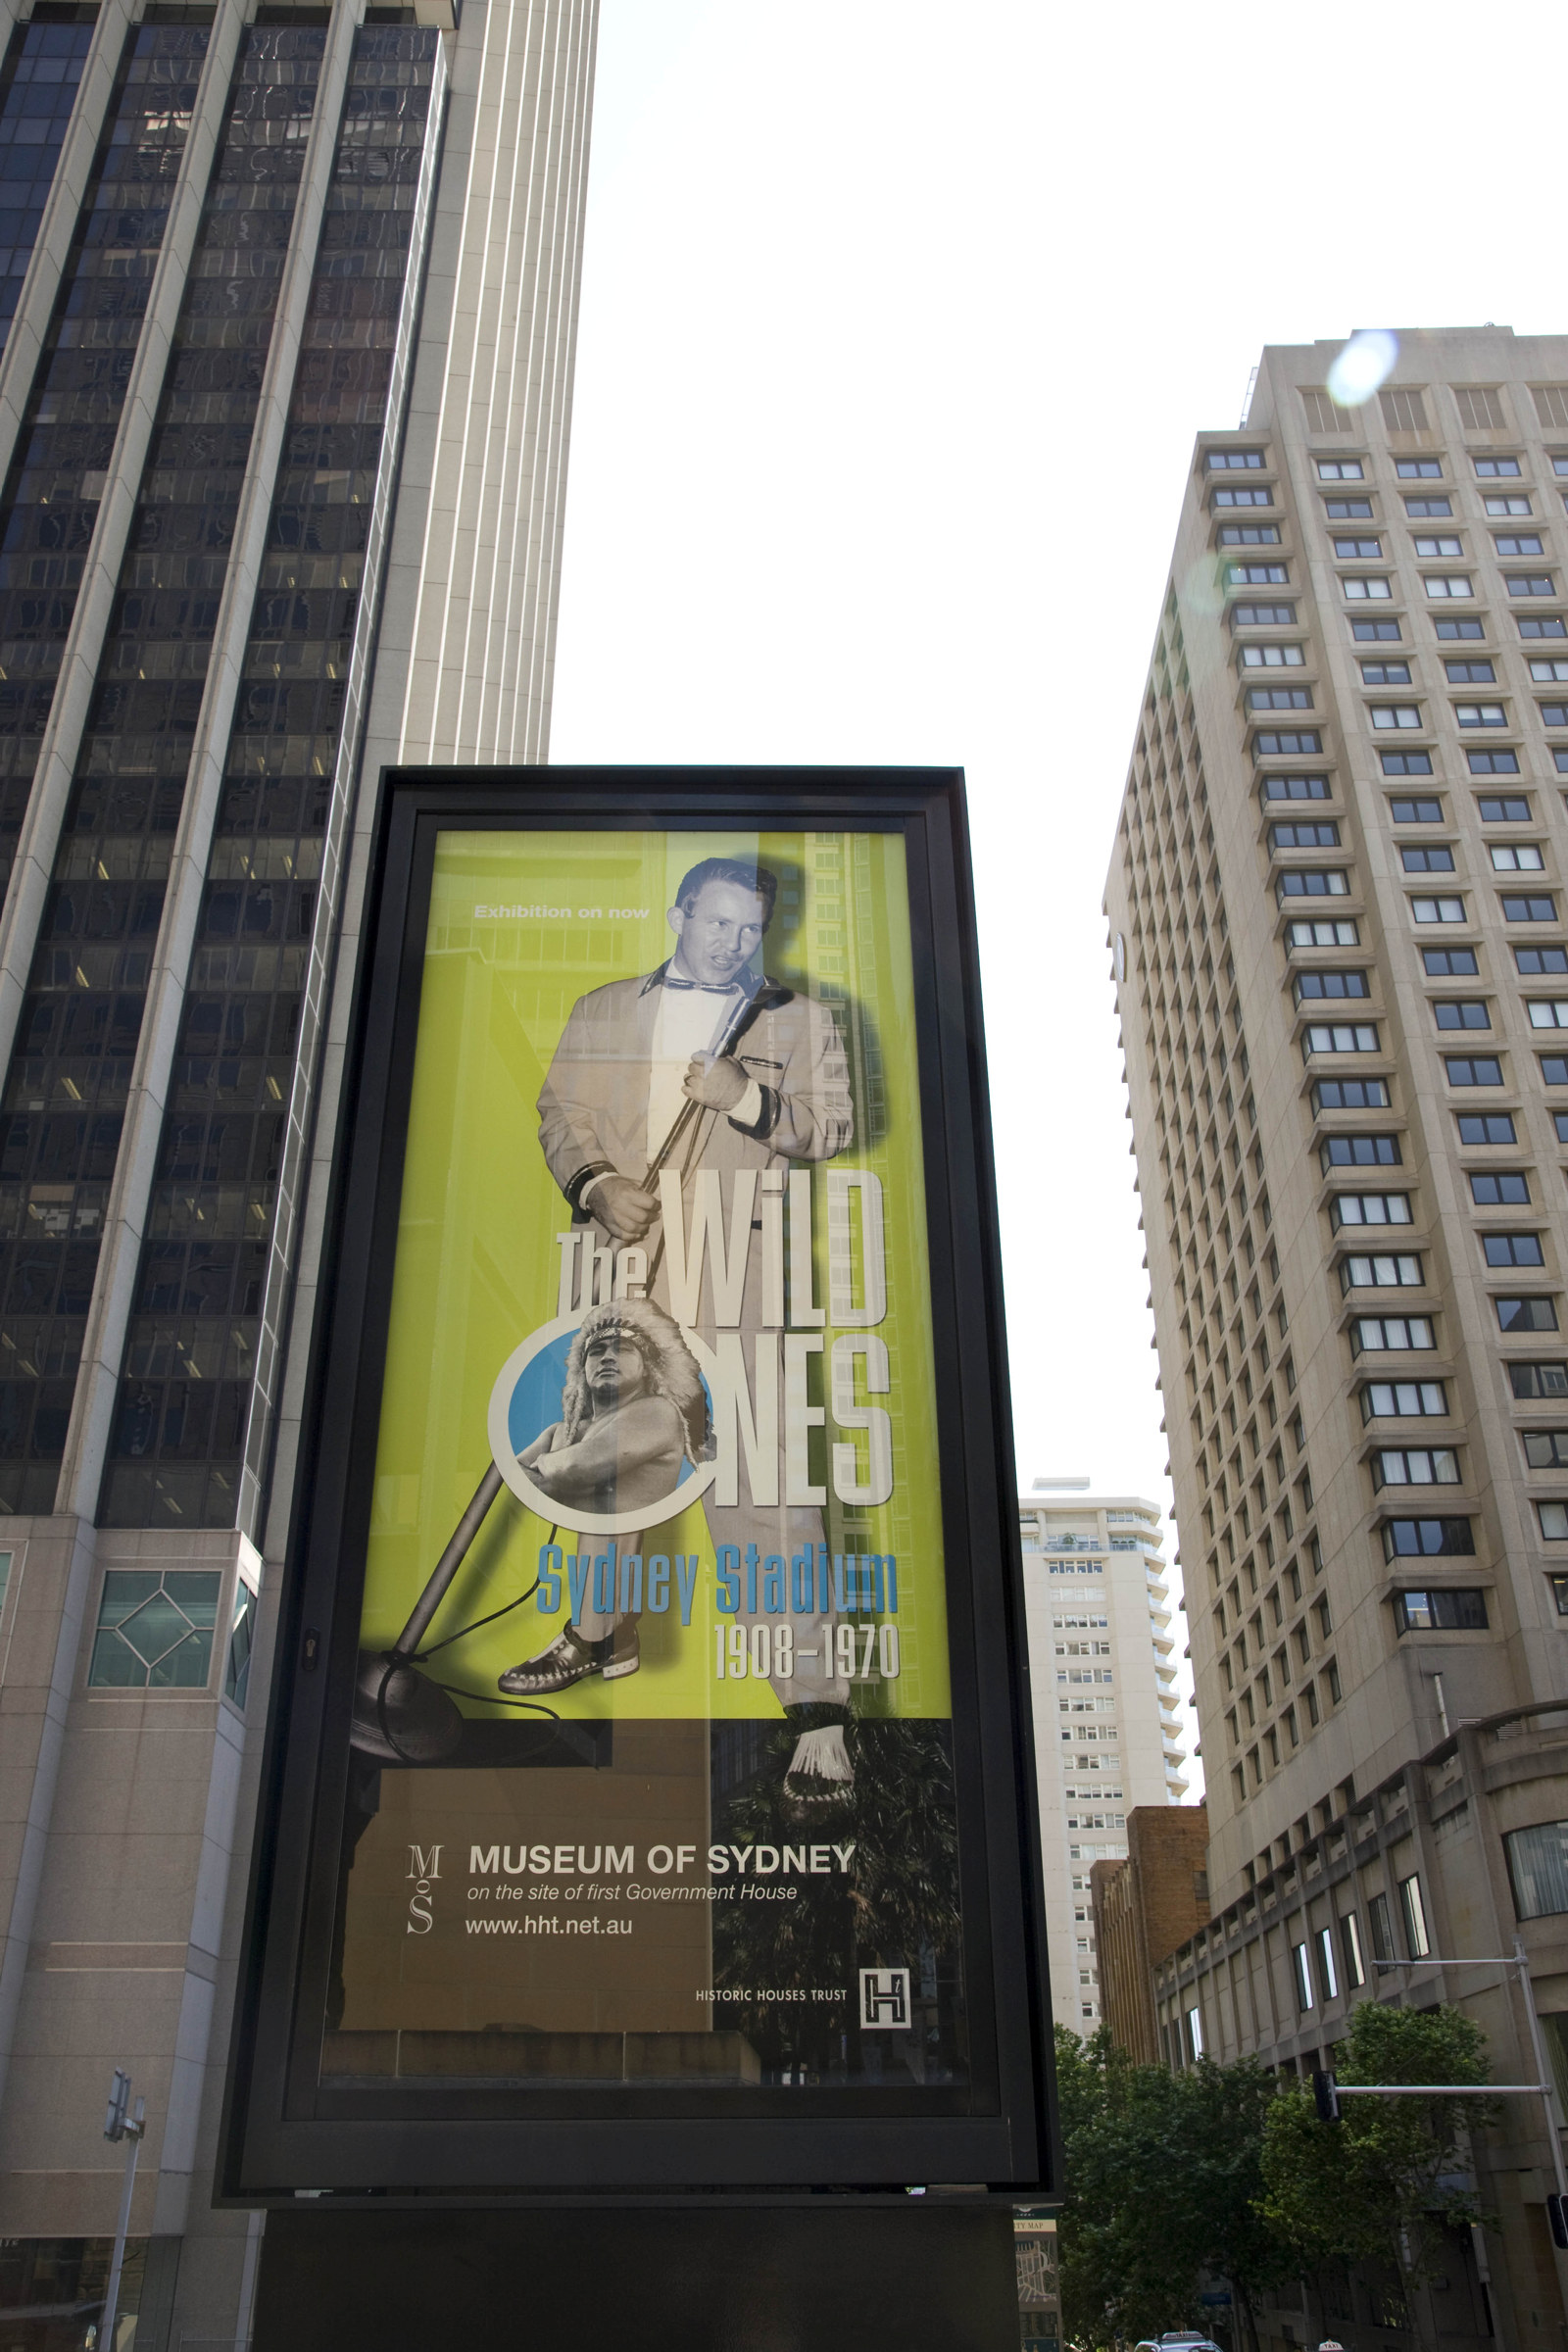 Large sign outside museum reads Wild Ones with a picture of a man holding a microphone.